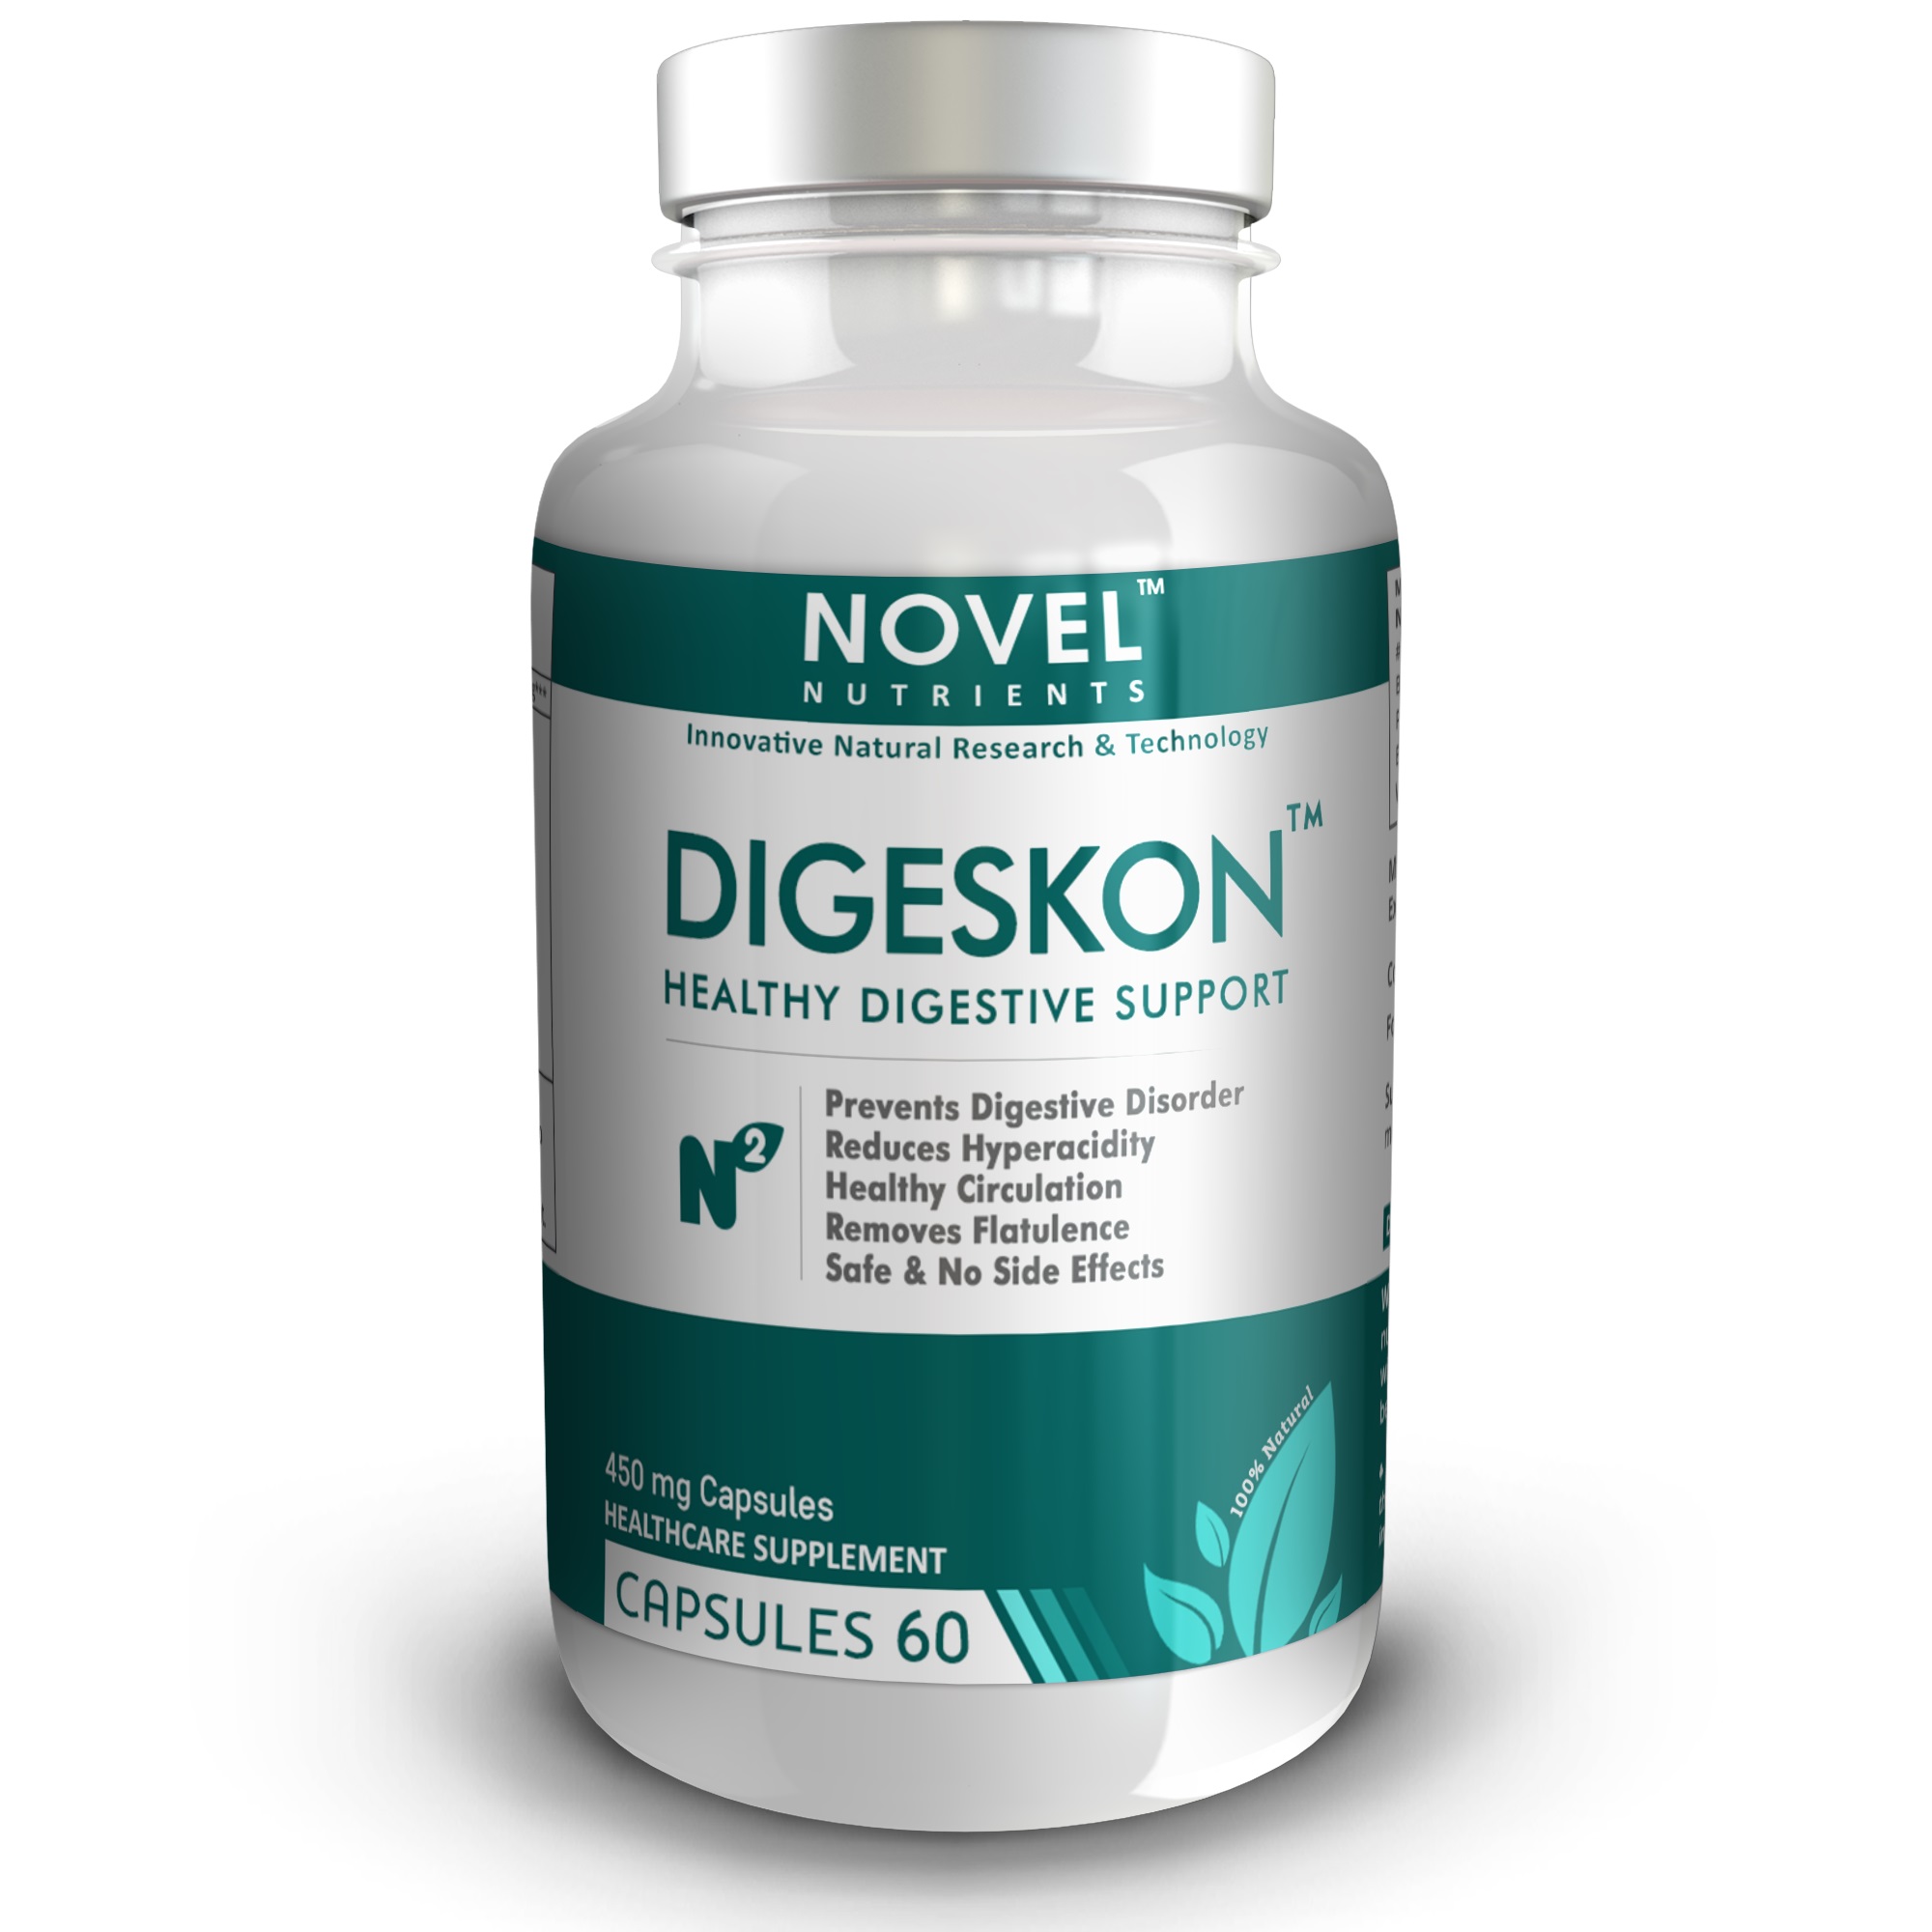 Digeskon - TM 450 mg Capsules Healthy Digestive Support